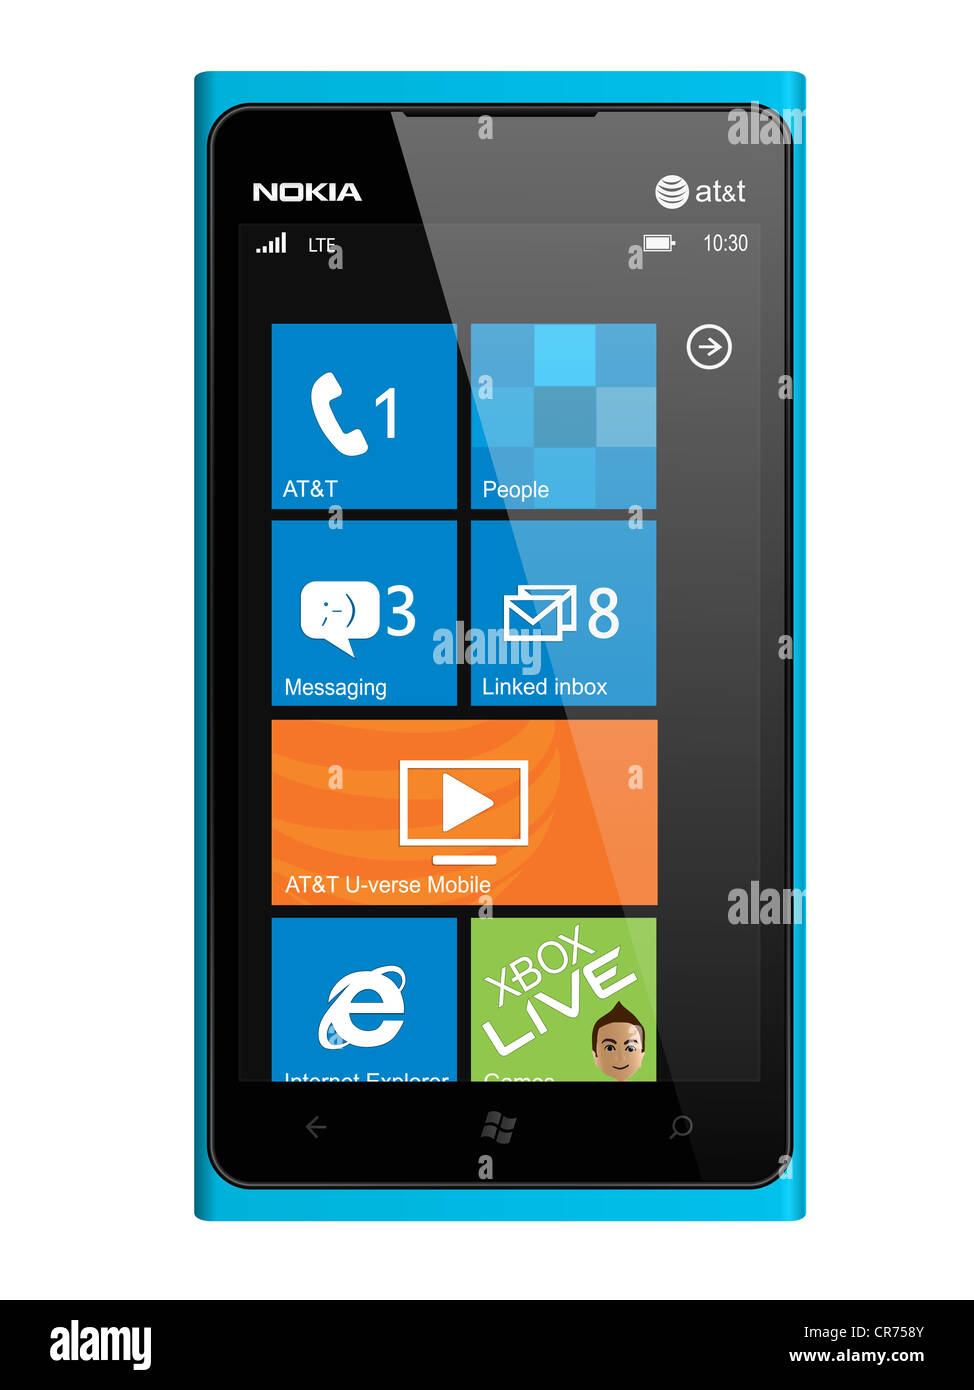 New Nokia smartphone design in blue. Featuring Windows Phone OS, handsets Lumia 900. Stock Photo